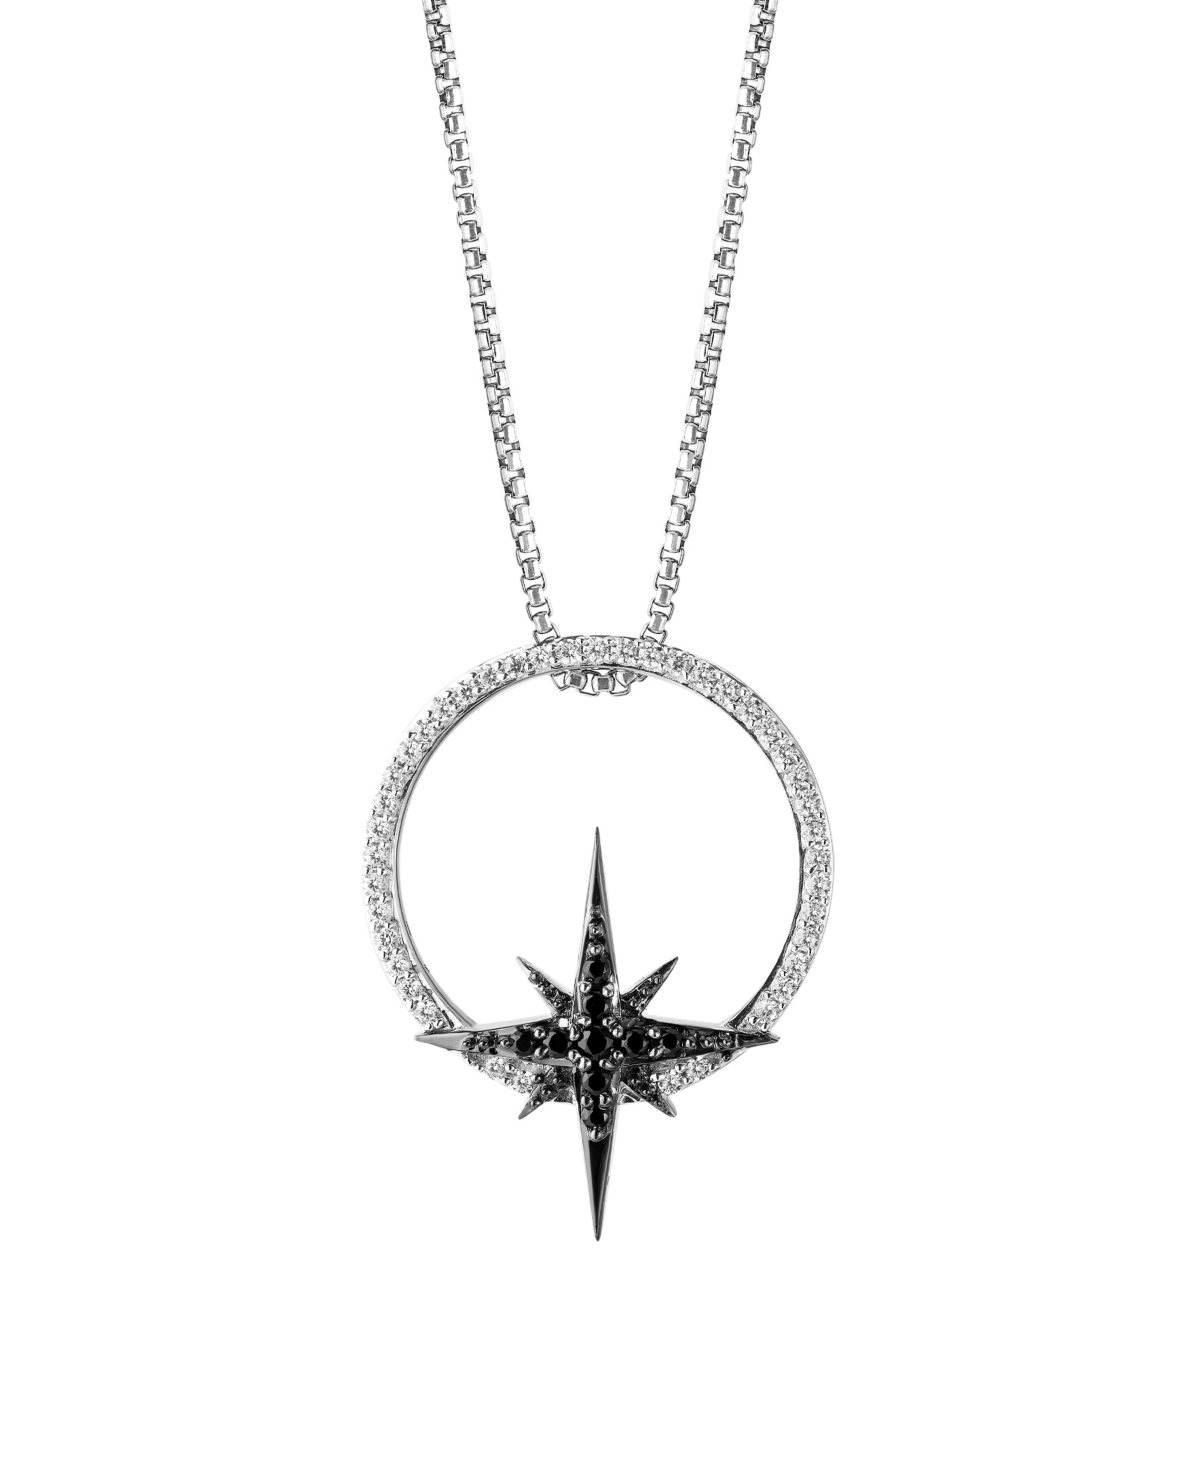 Guardians of Light Diamond Pendant Necklace (1/5 ct. t.w.) in Sterling Silver - Sterling Silver